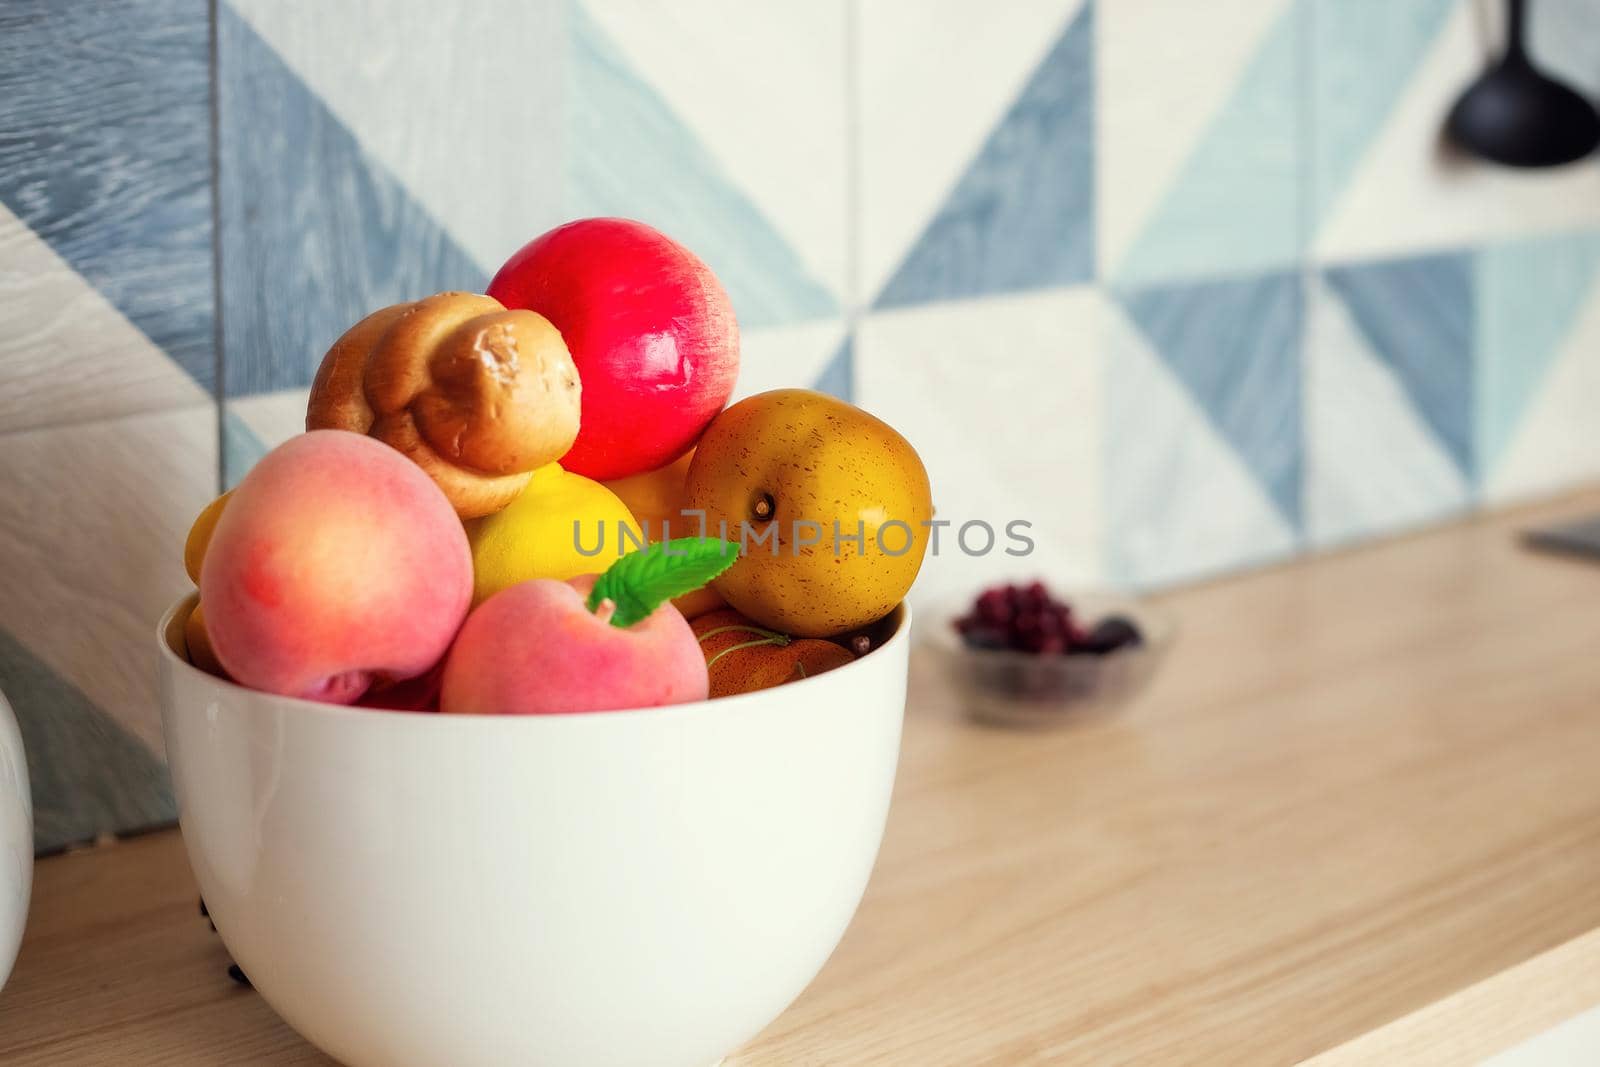 A large bowl of fruits and vegetables stands on the kitchen table, the background goes into blur, selective focus